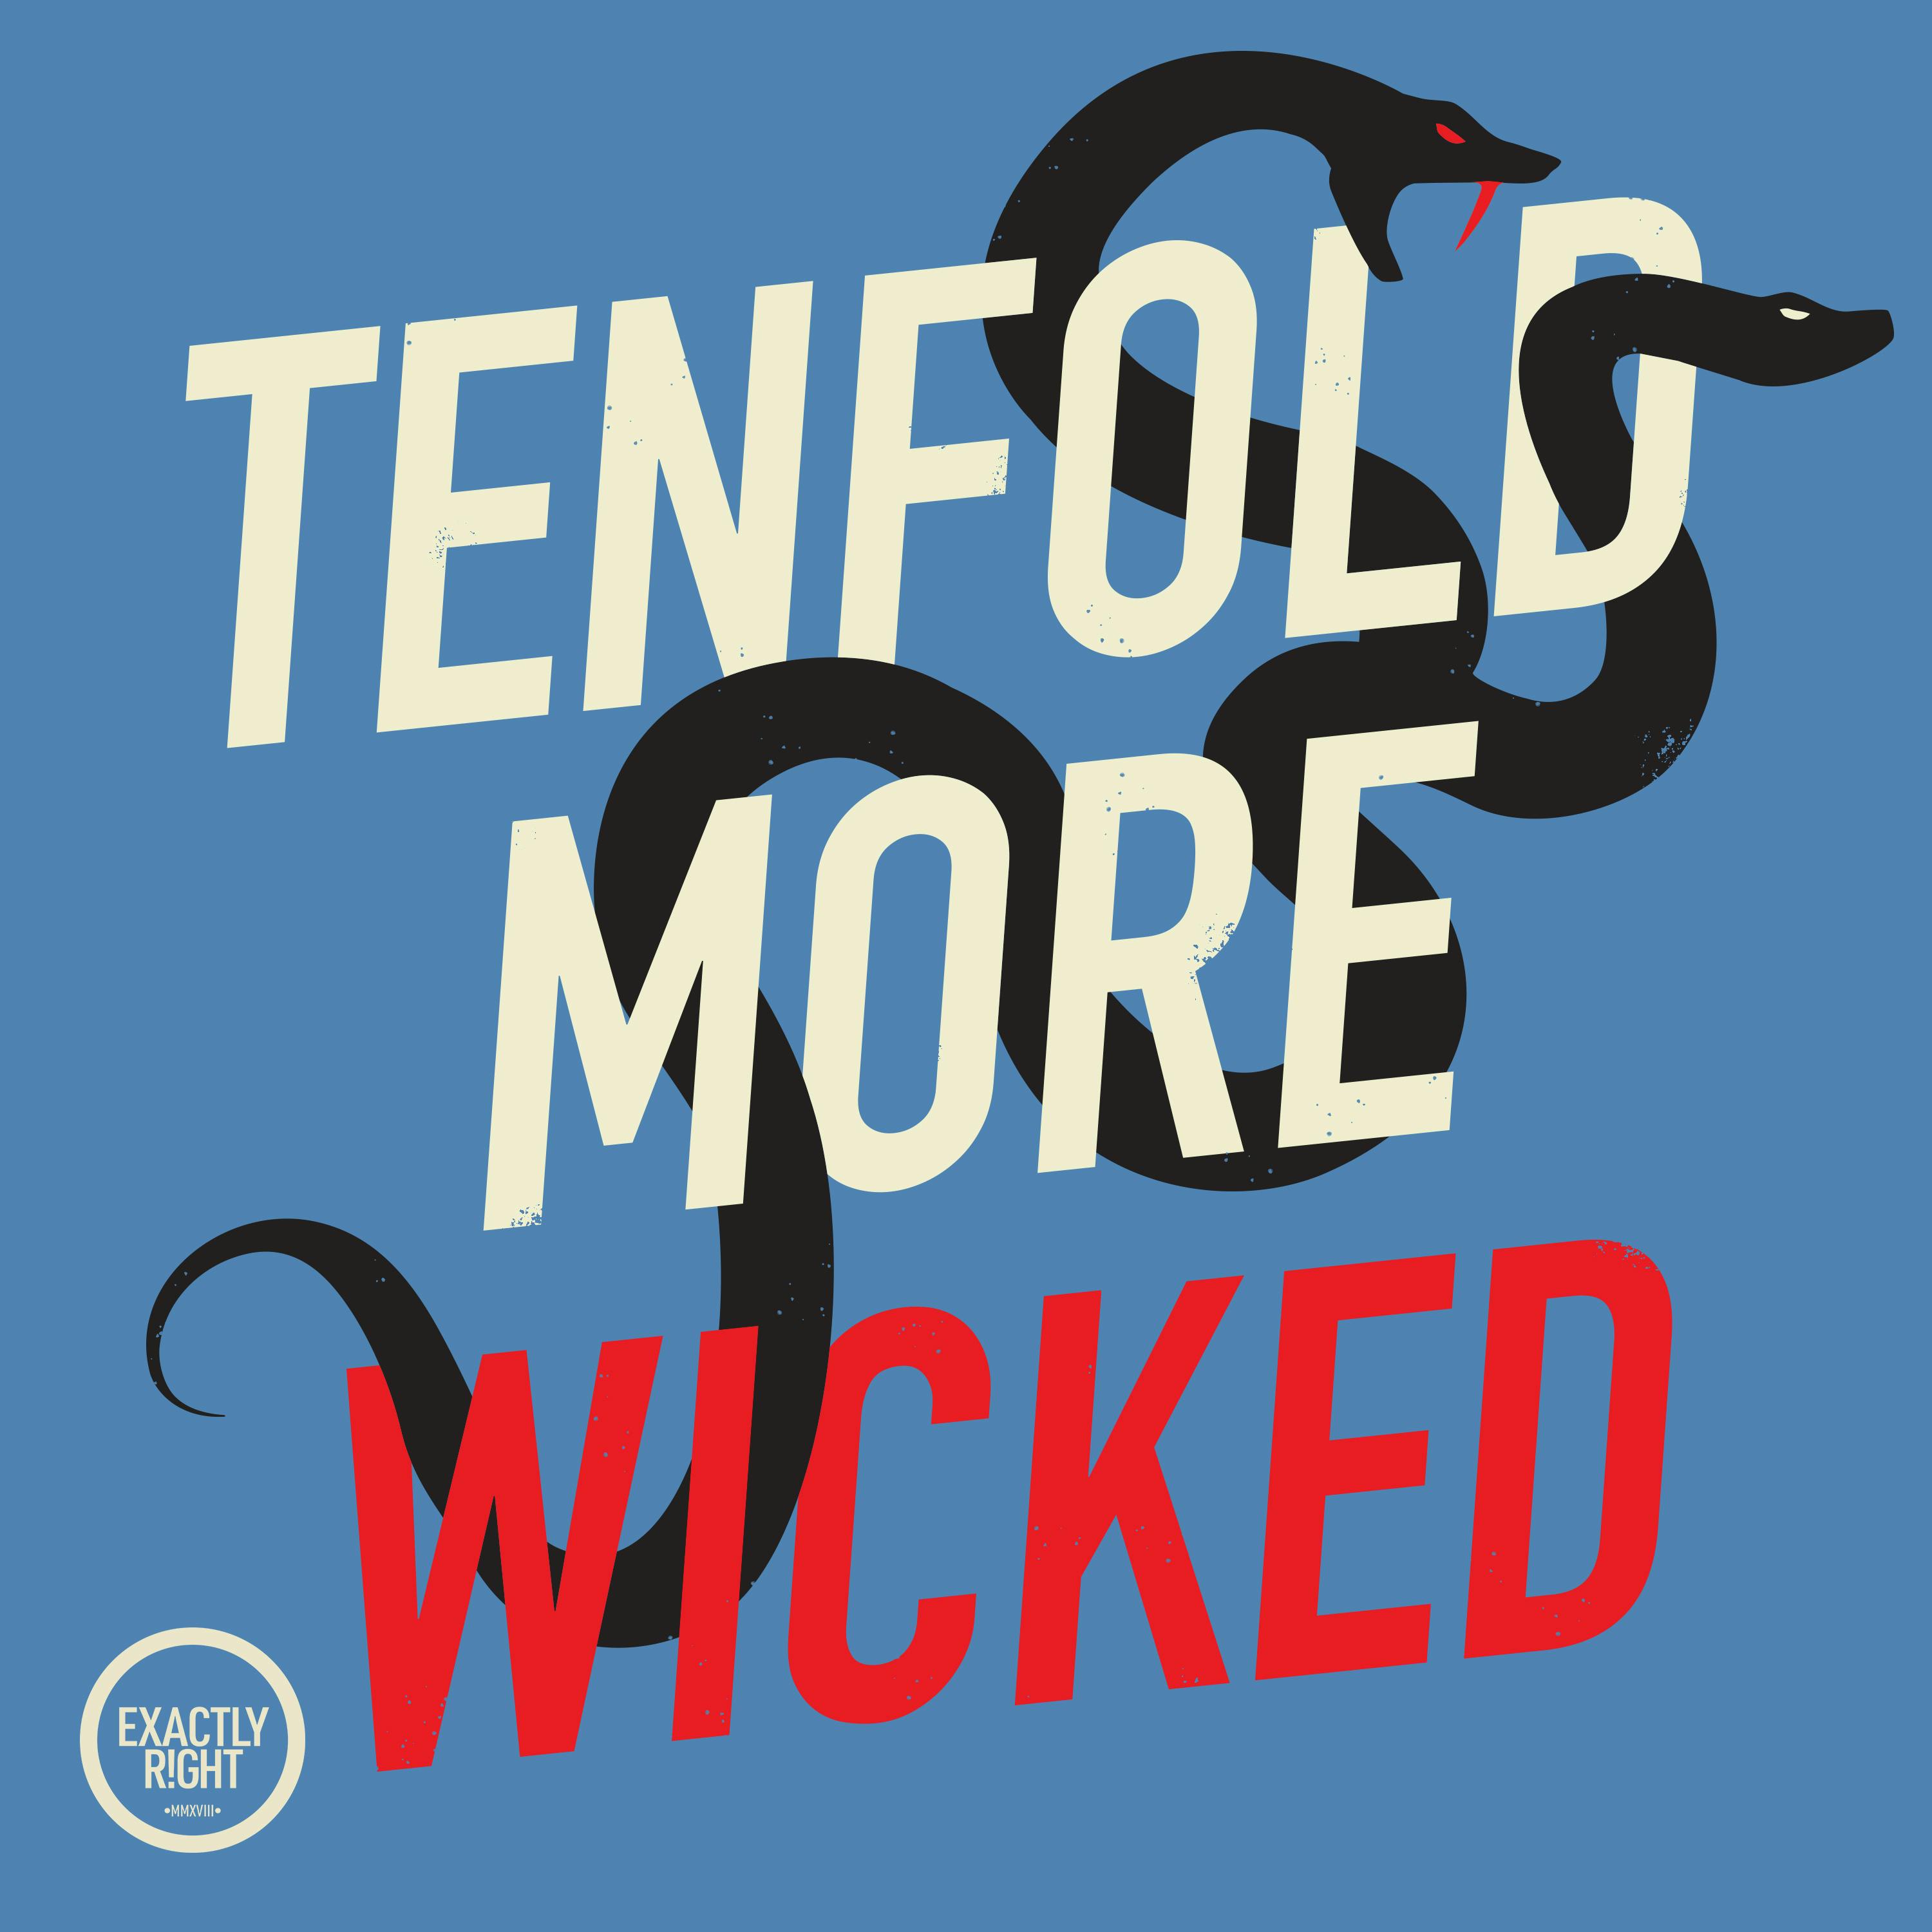 Tenfold More Wicked - Fire and Brimstone: Wronged